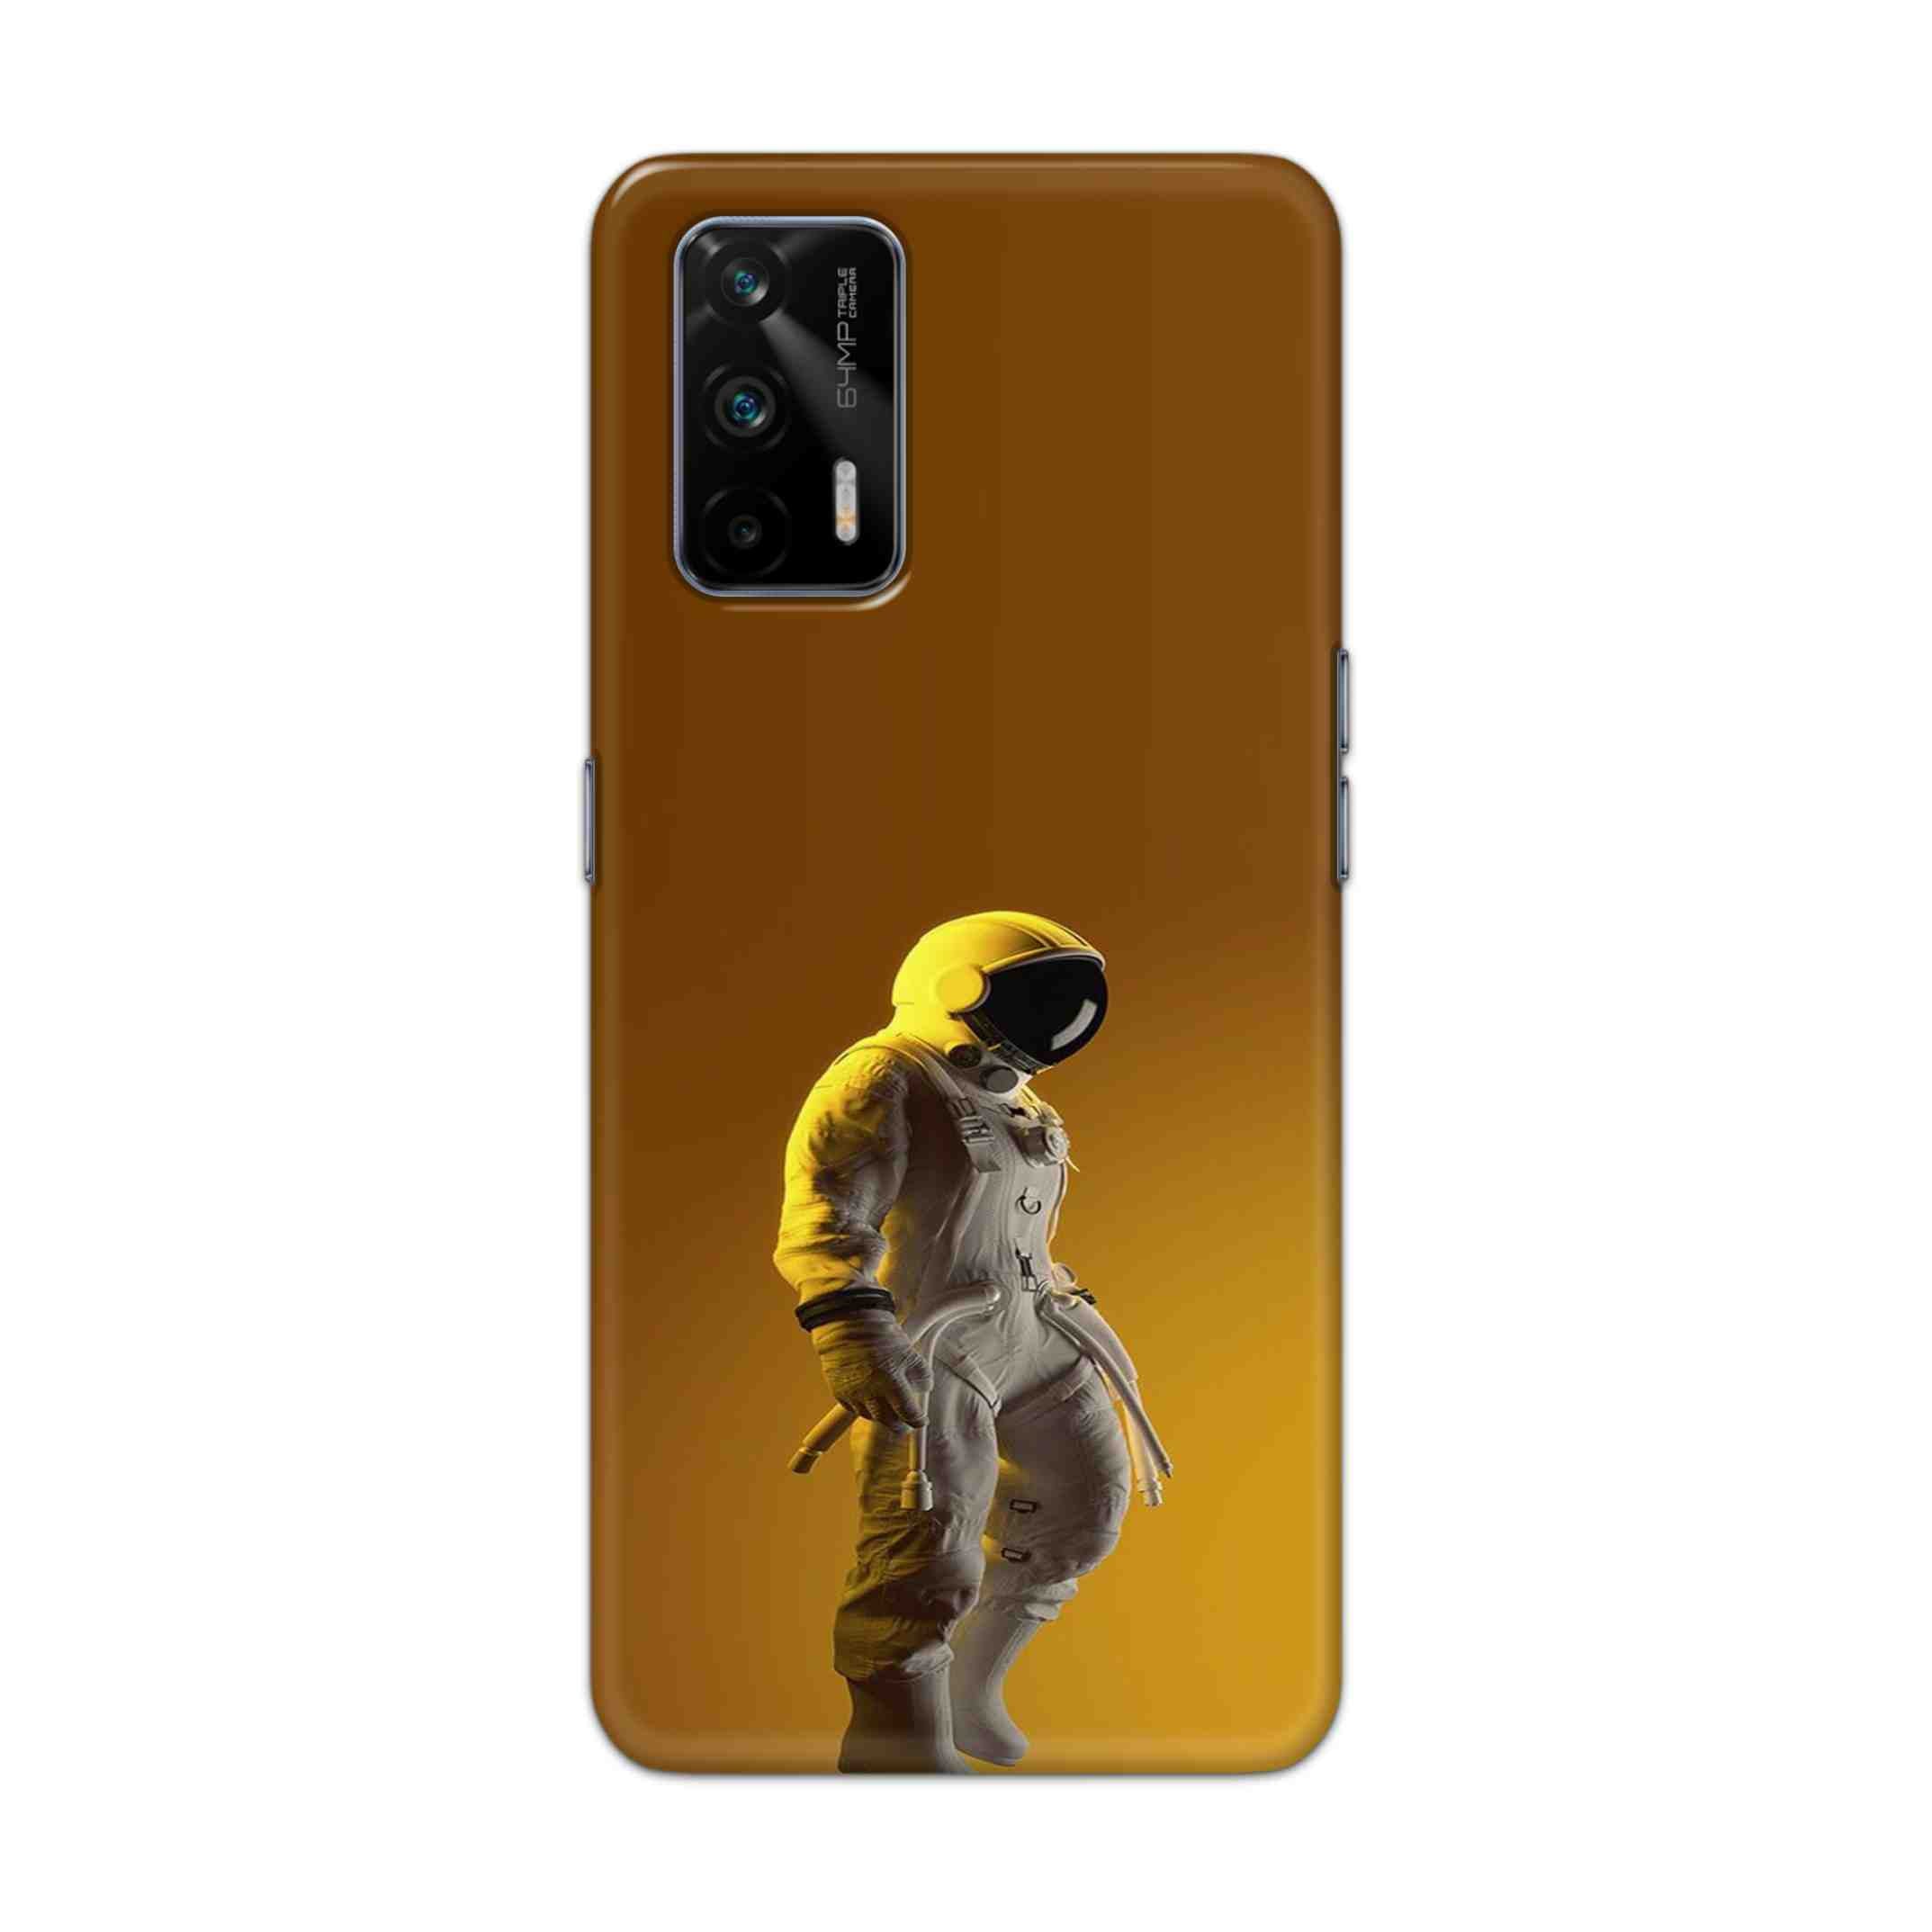 Buy Yellow Astronaut Hard Back Mobile Phone Case Cover For Realme GT 5G Online